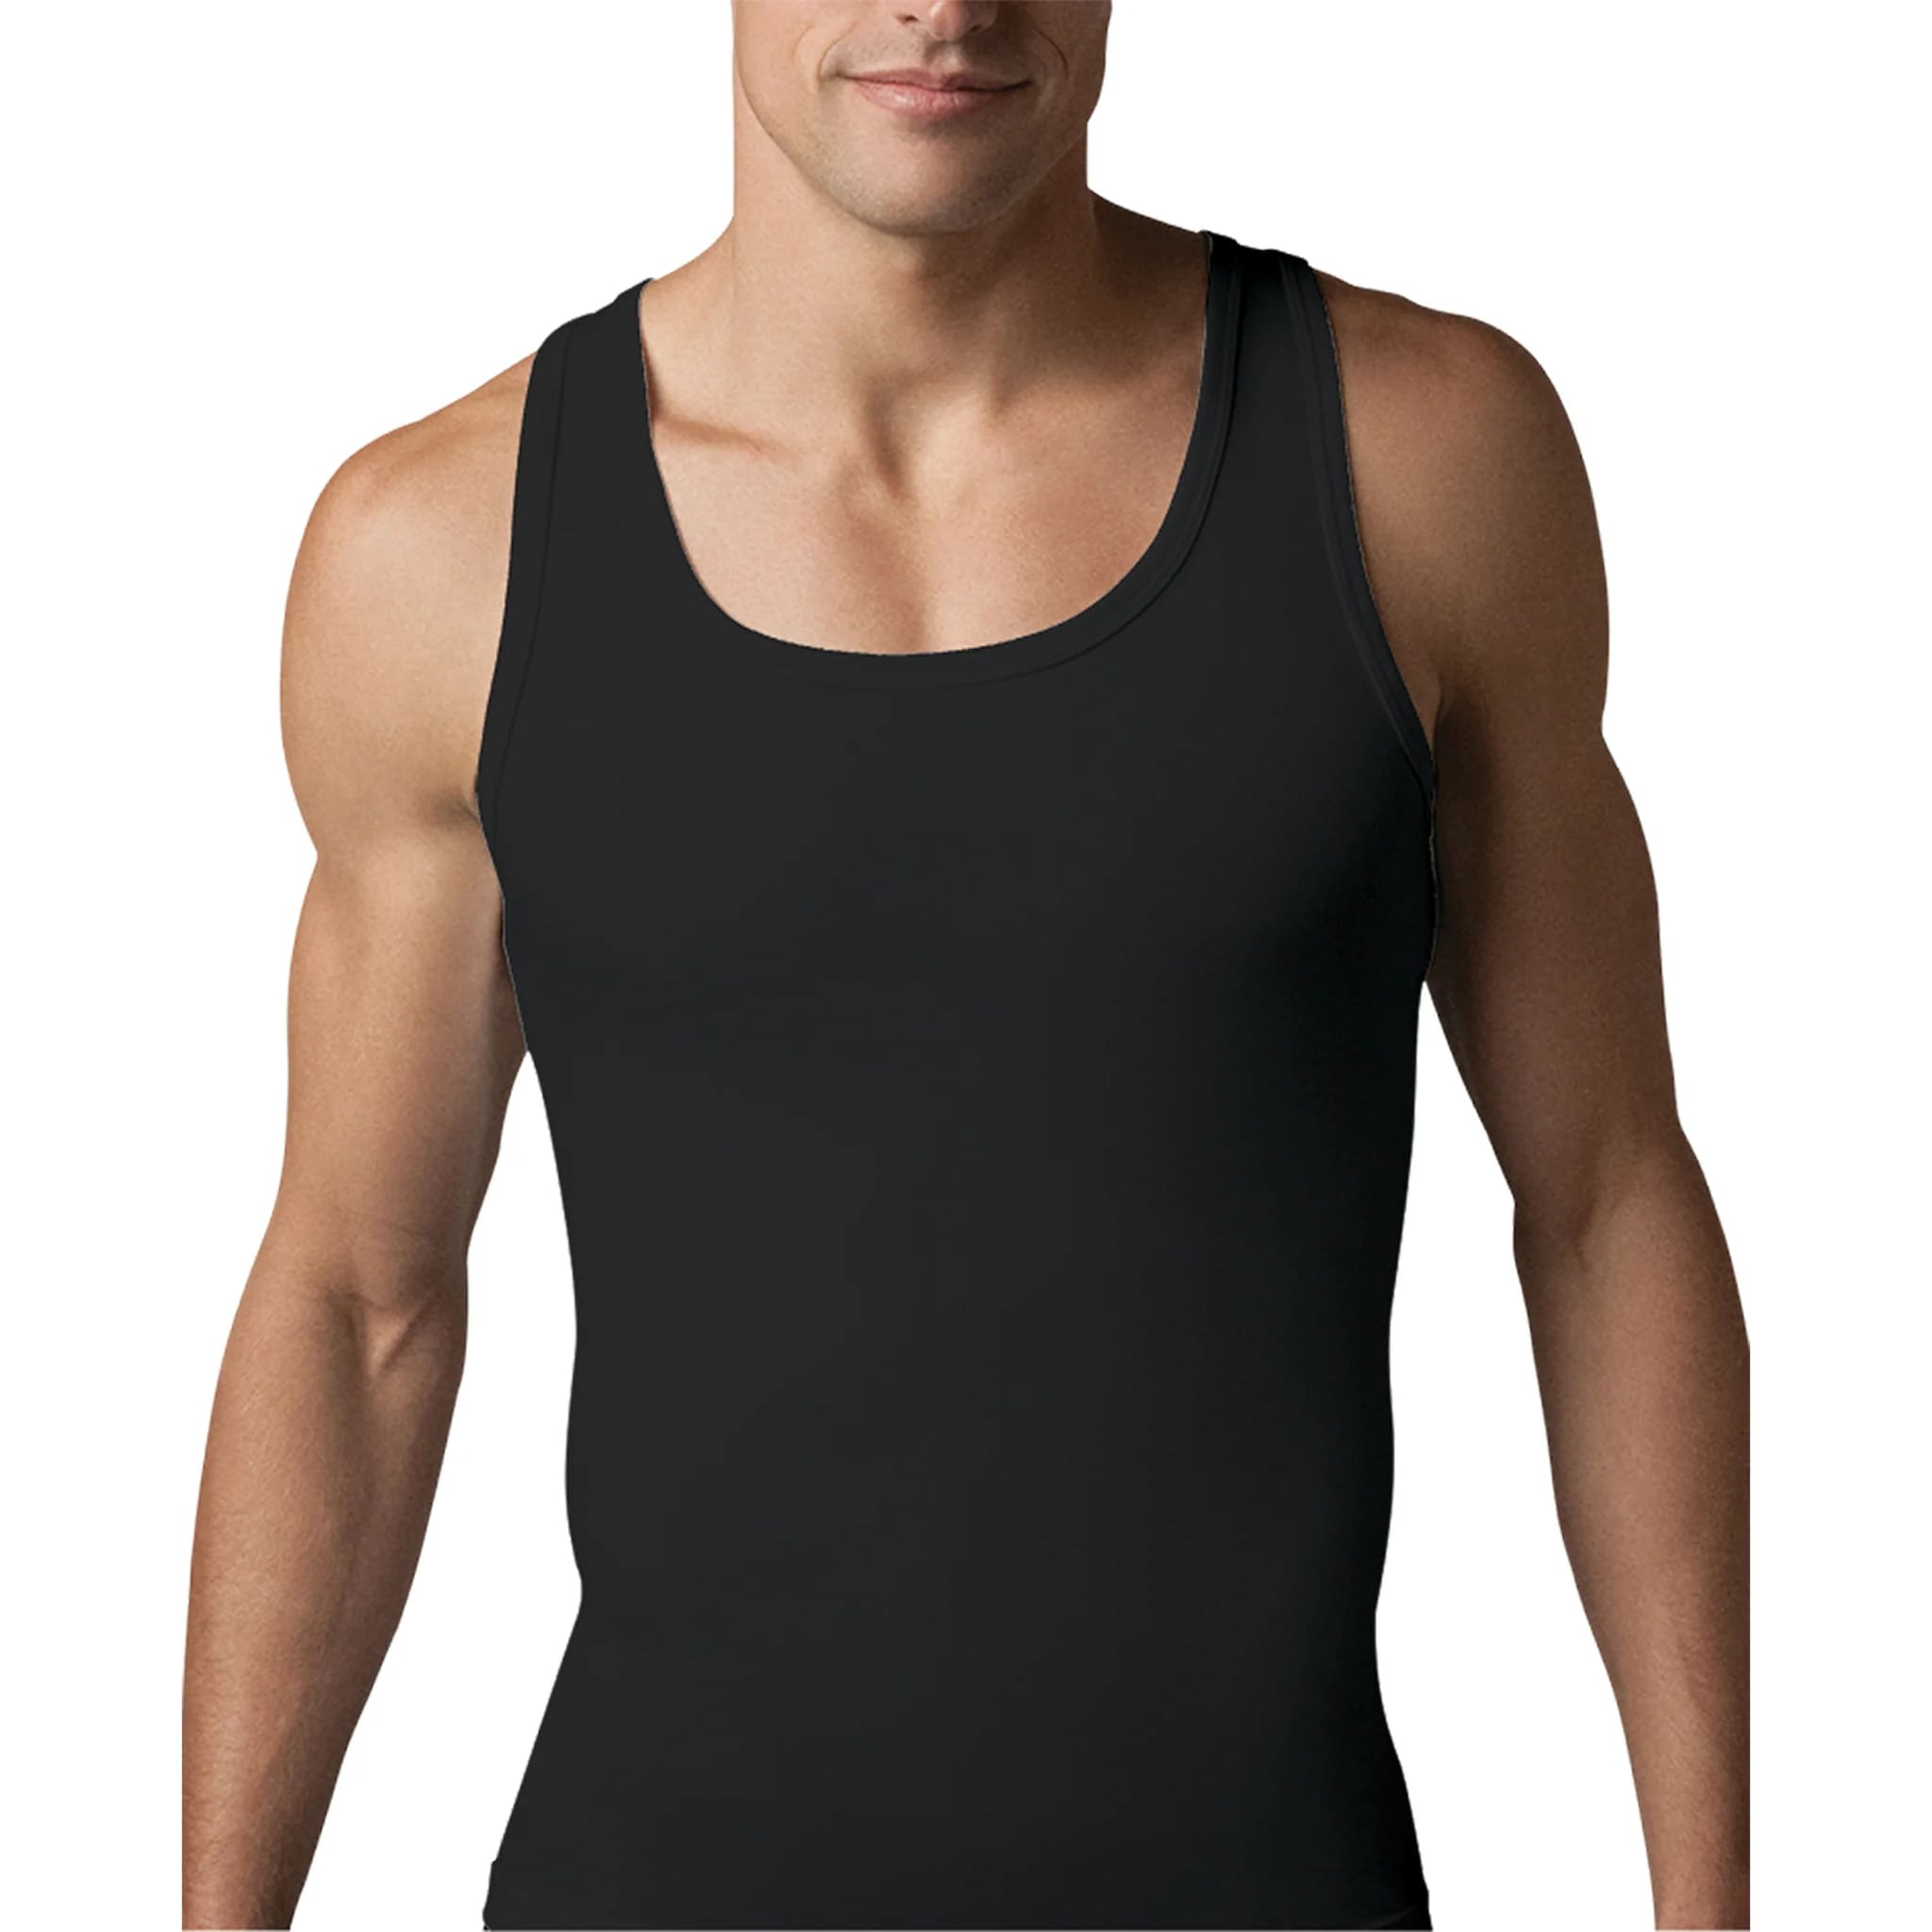 100% Cotton Tank Top 1 pack Color Gray from al samah